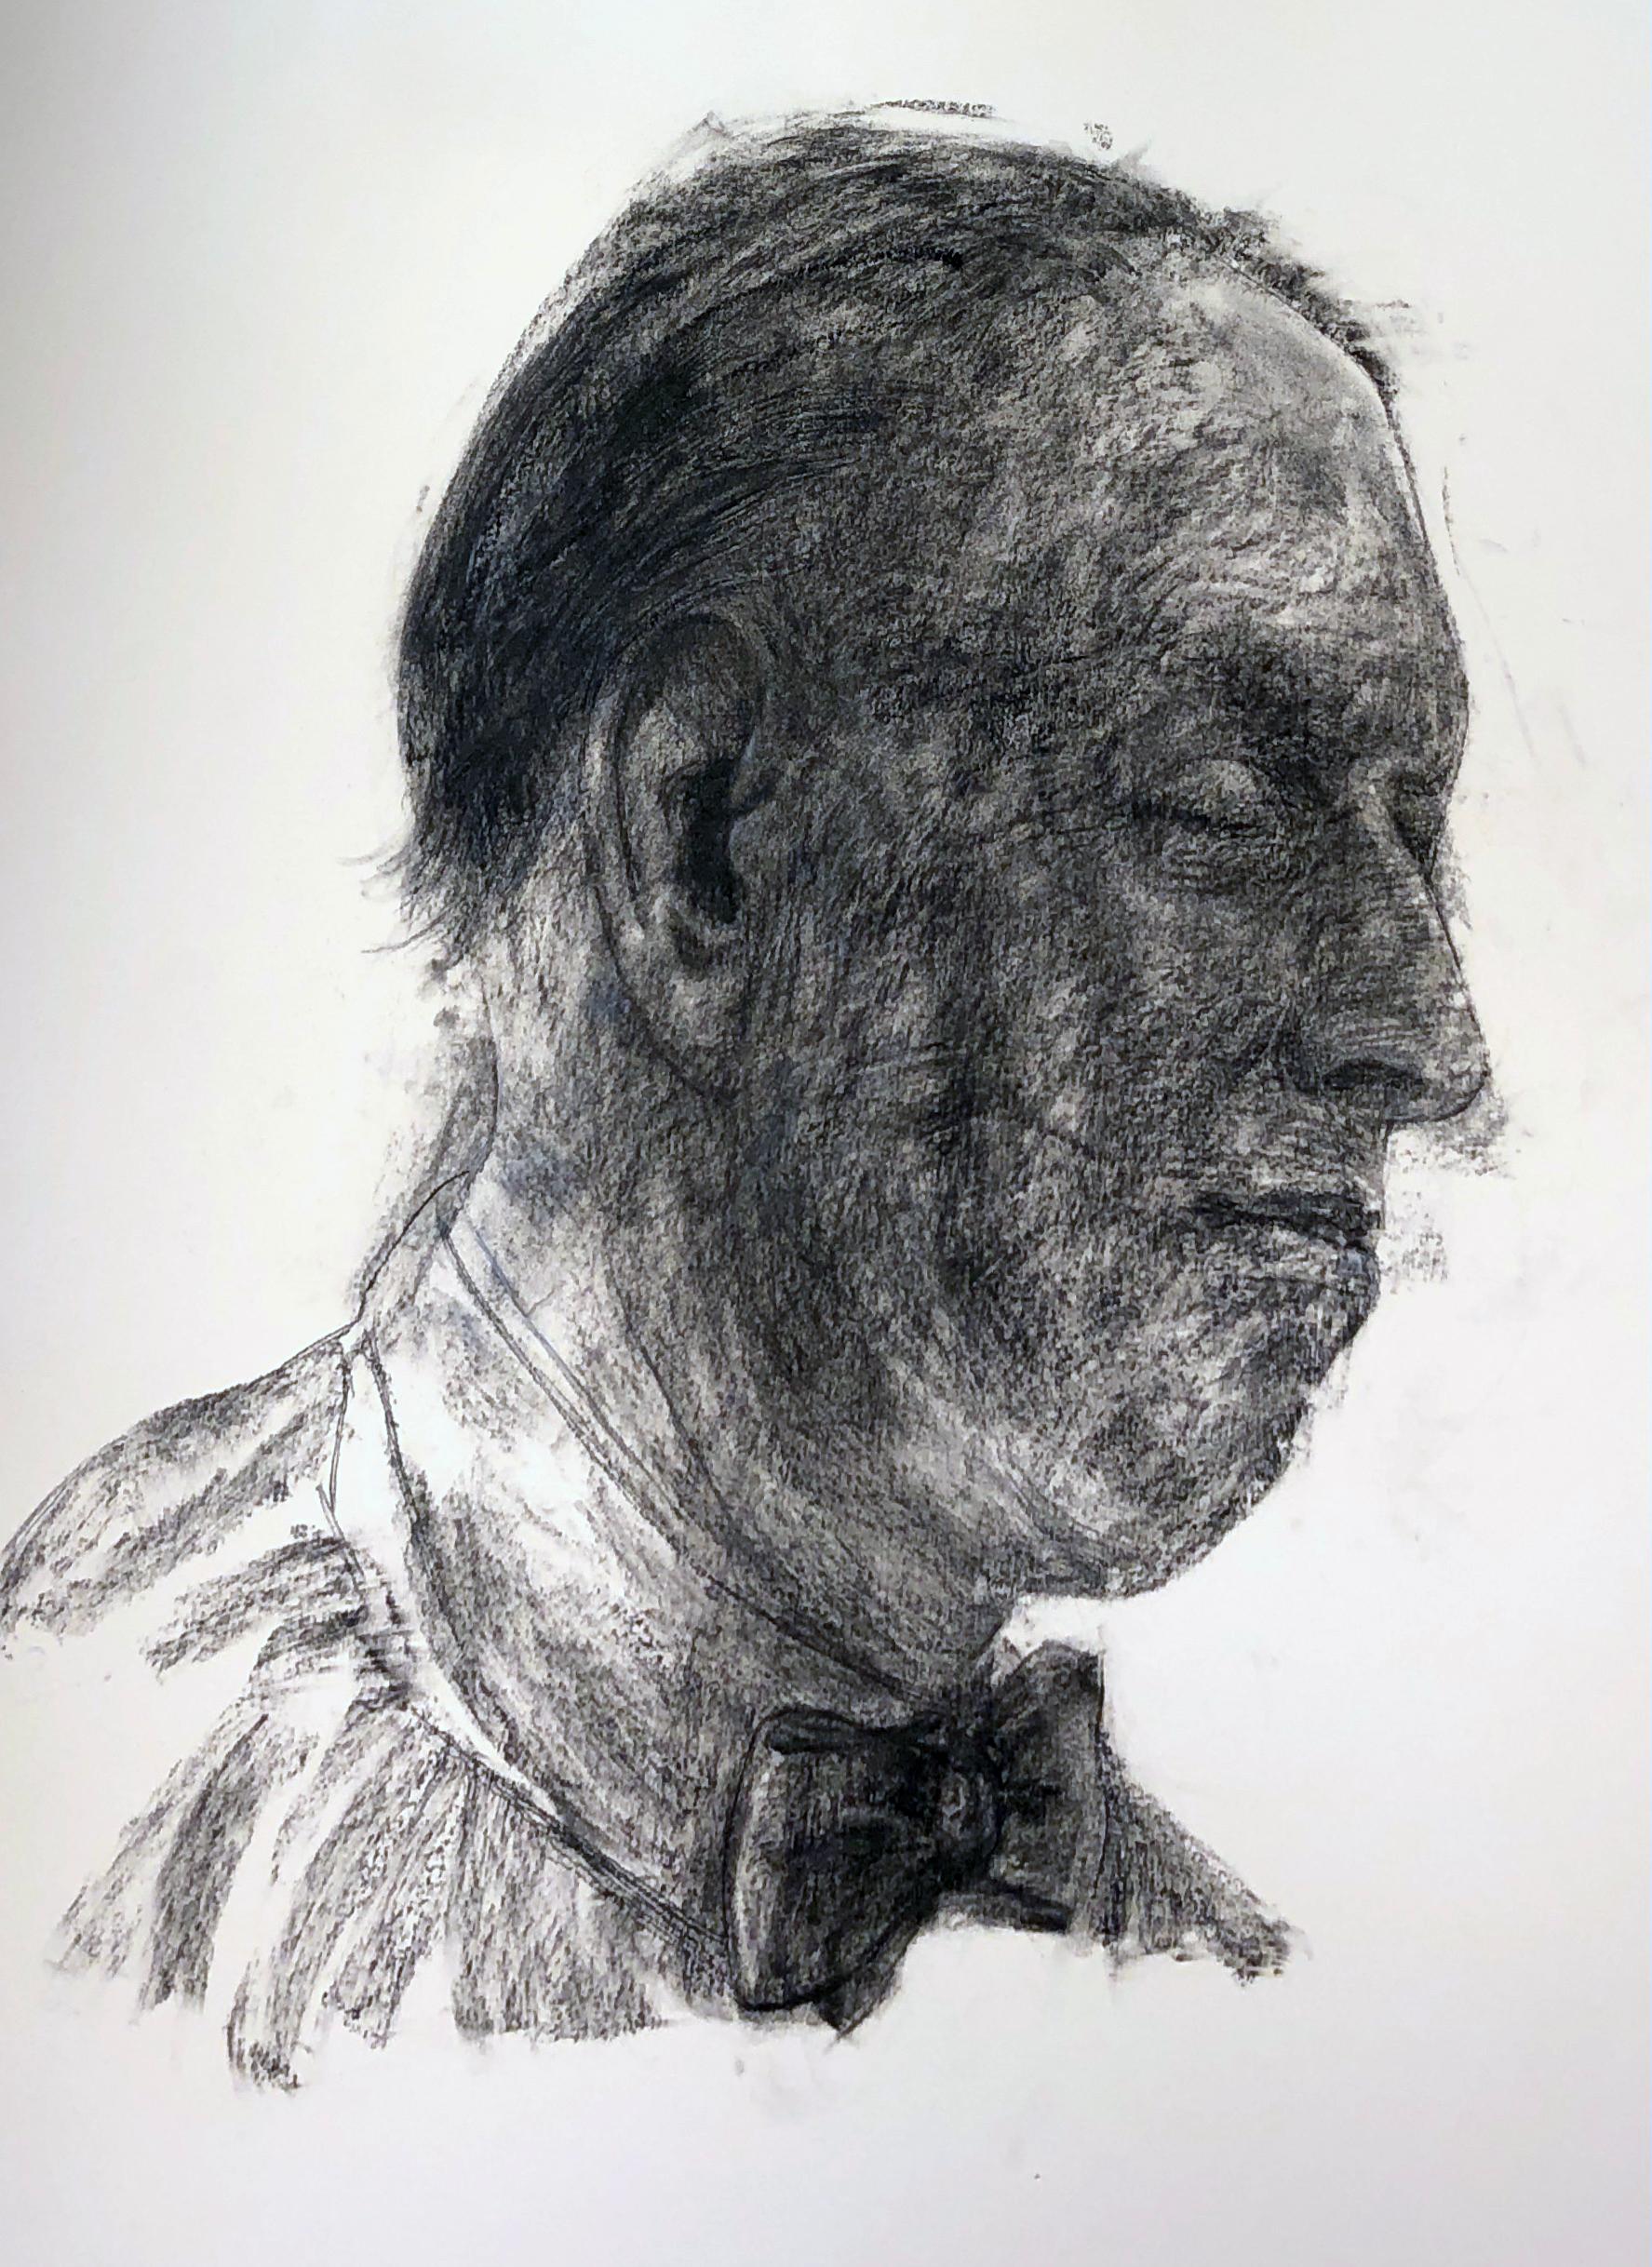 Reflection #1, Charcoal Drawing of a Man Gazing Down, Wearing a Bow Tie - Art by David Becker